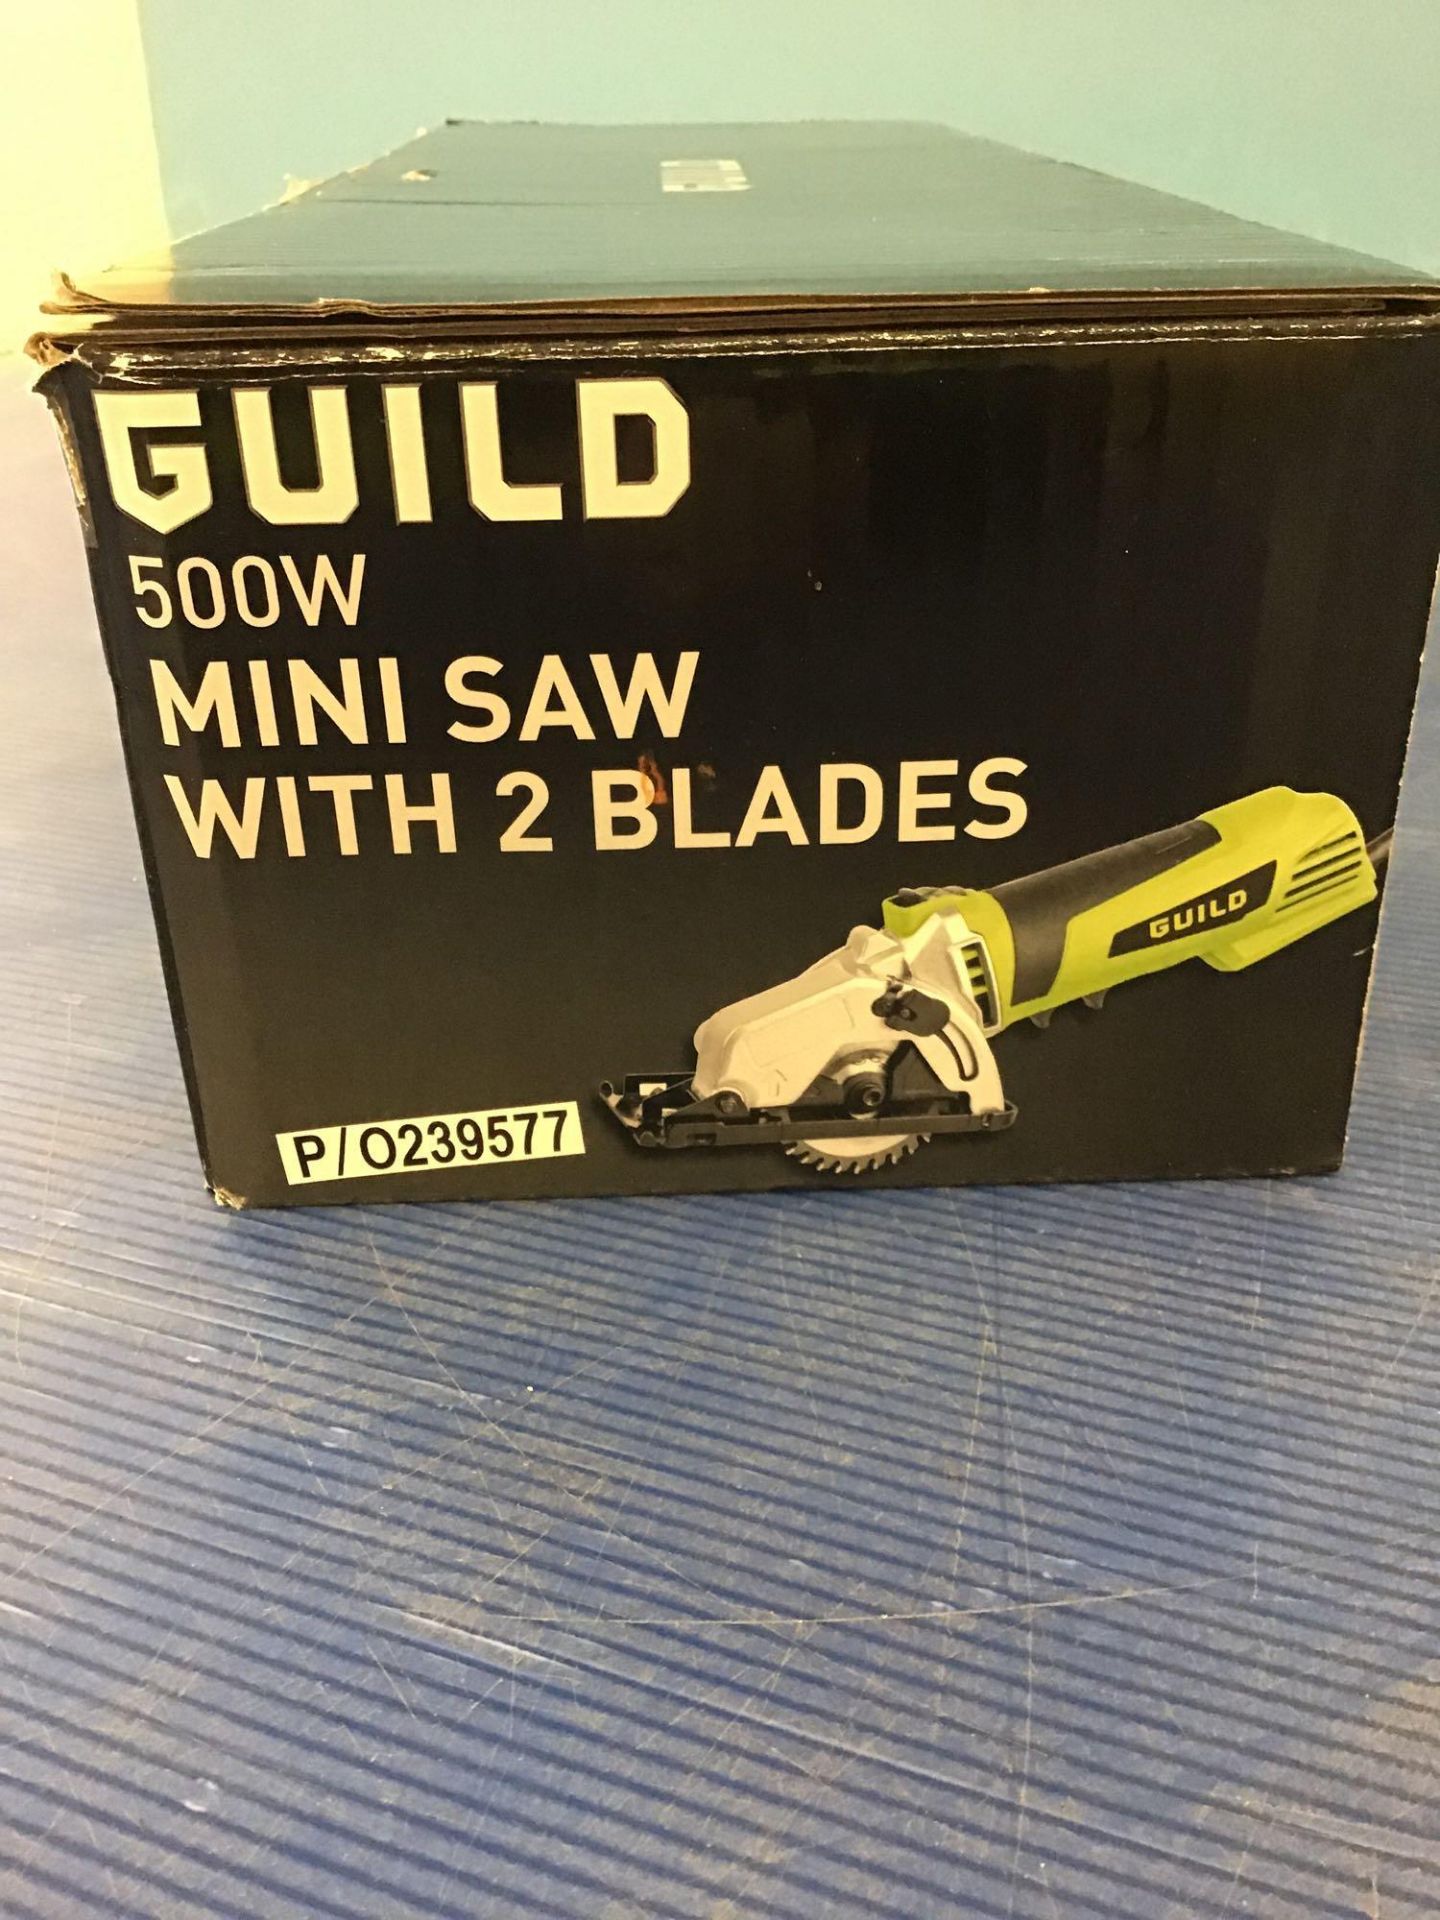 Guild 85mm Compact Plunge Saw - 500W, £50.00 RRP - Image 3 of 6